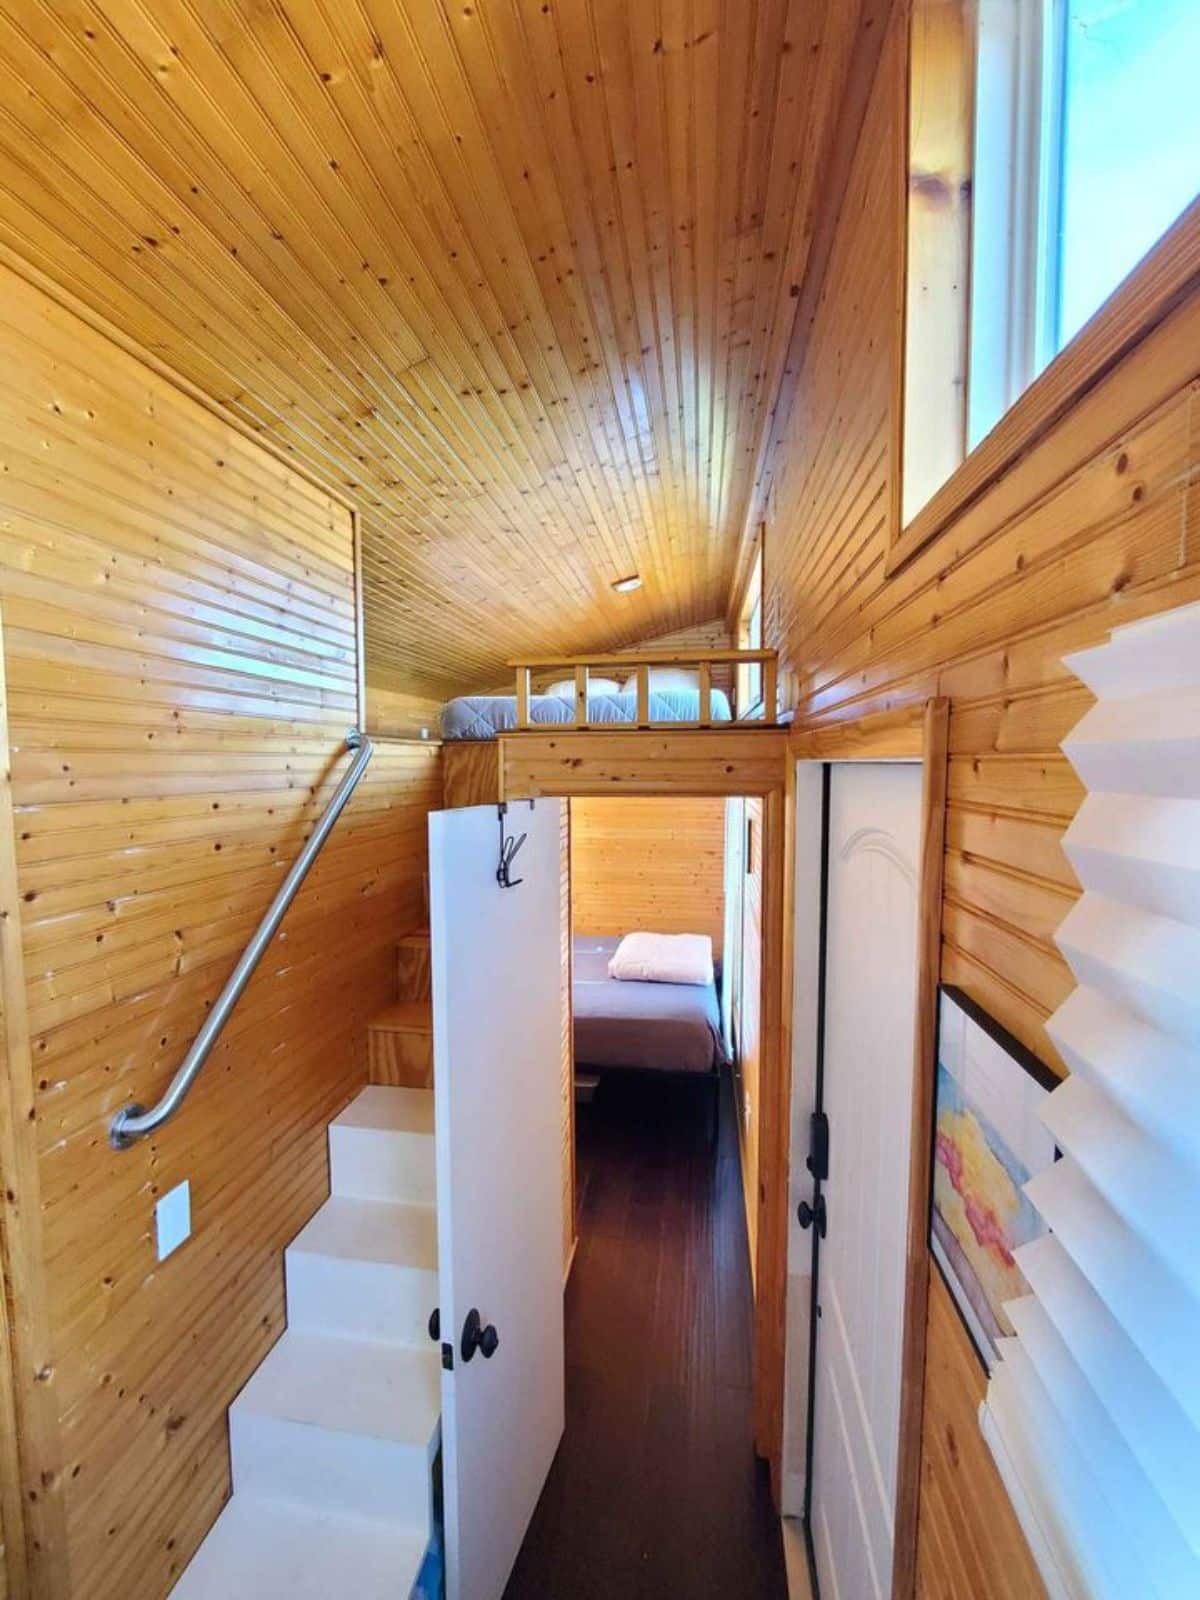 stairs leading to the loft above the main floor bedroom